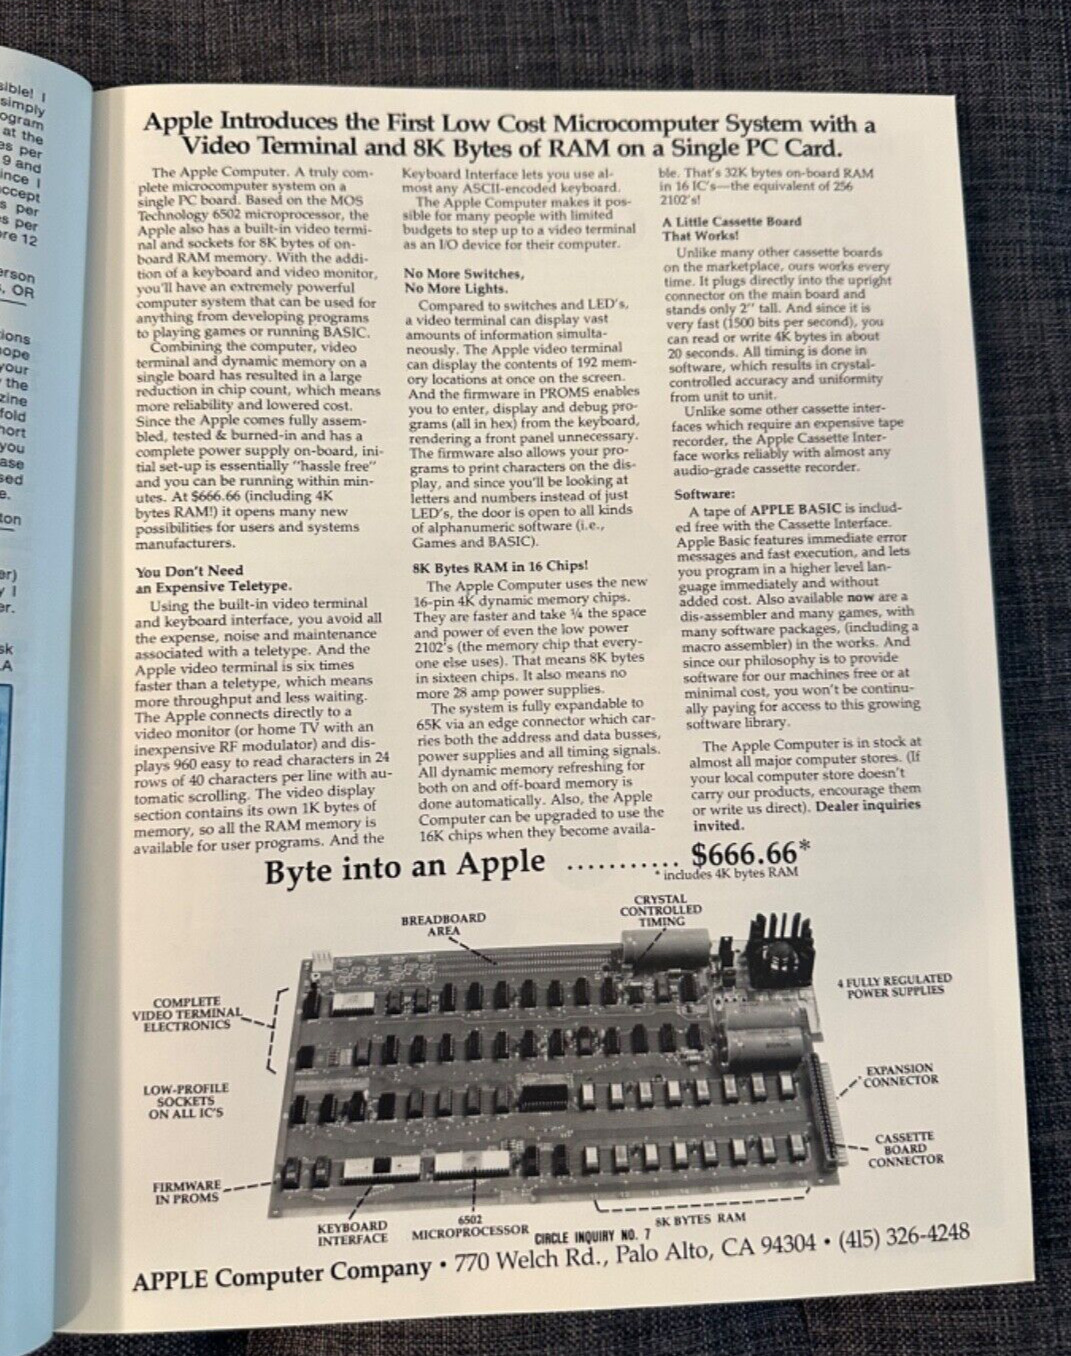 Rare Interface Age December 1976 with early historical Apple I Computer Print Ad